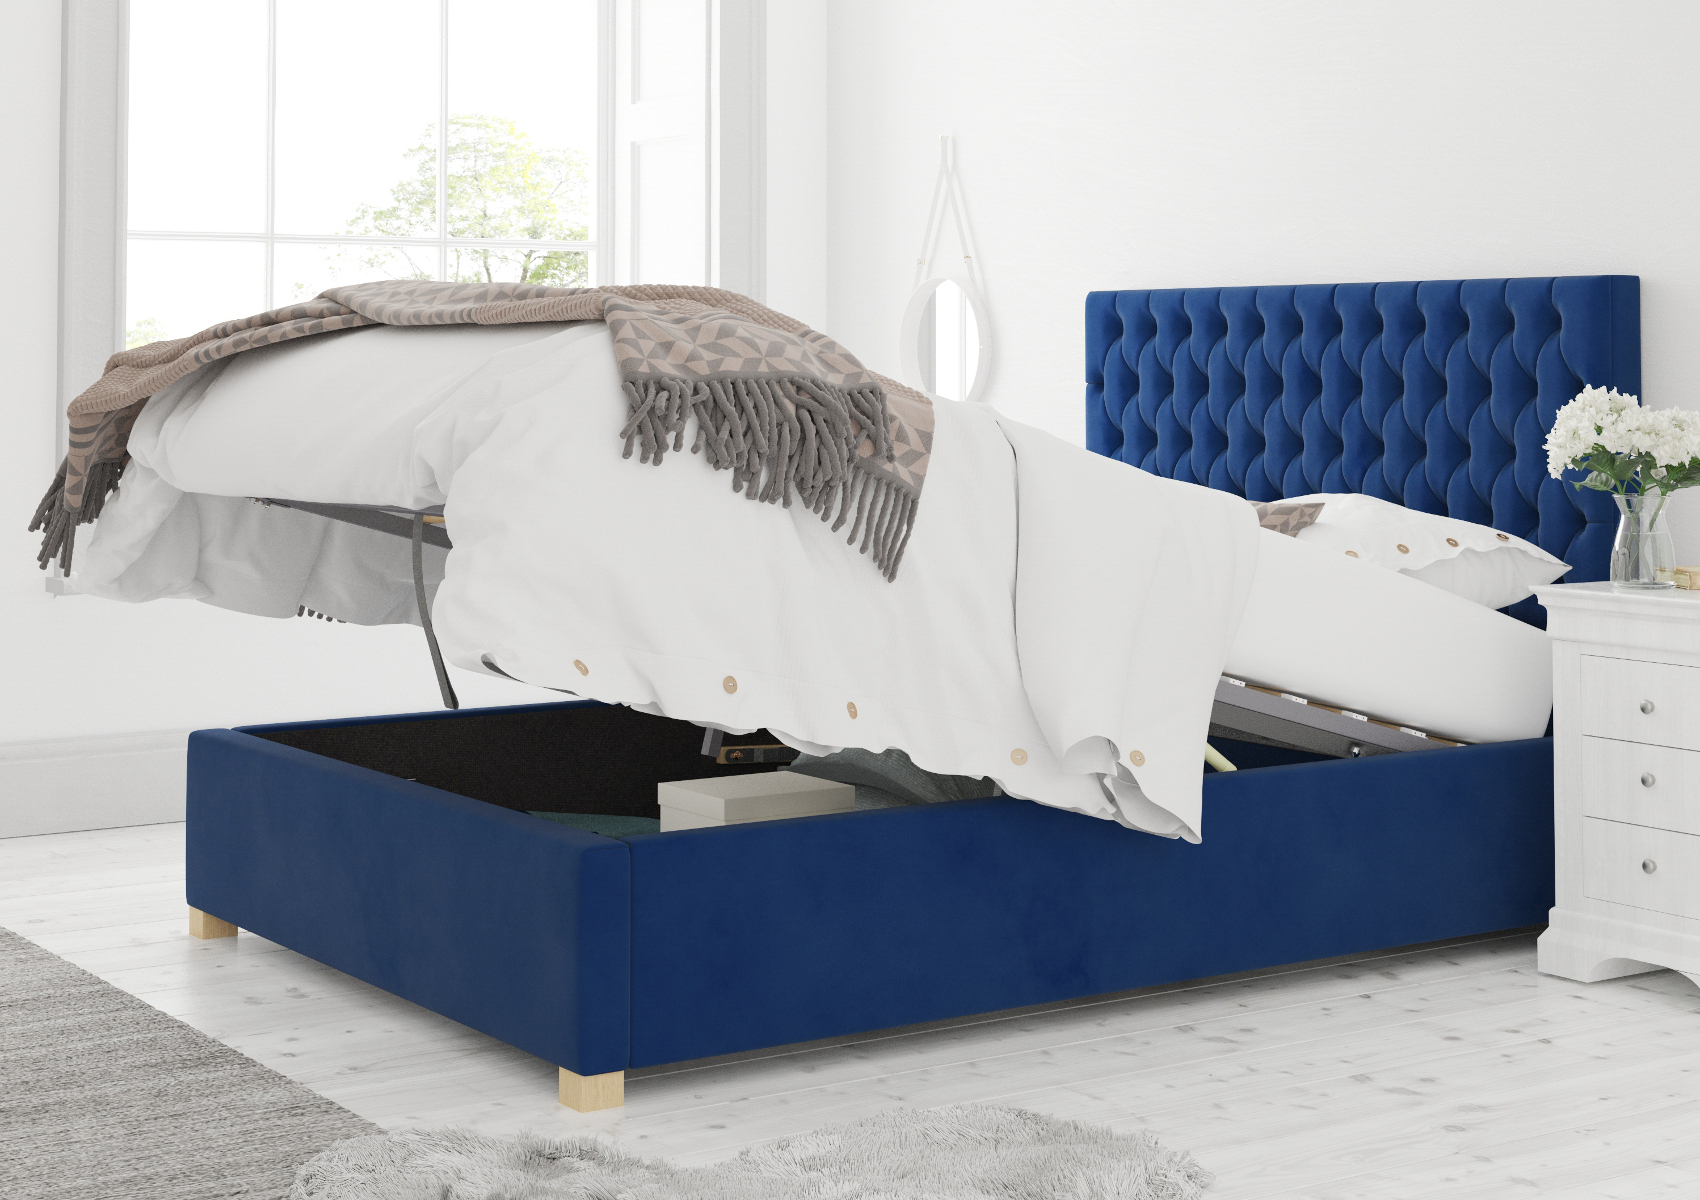 View Malton Navy Upholstered Compact Double Ottoman Bed Time4Sleep information